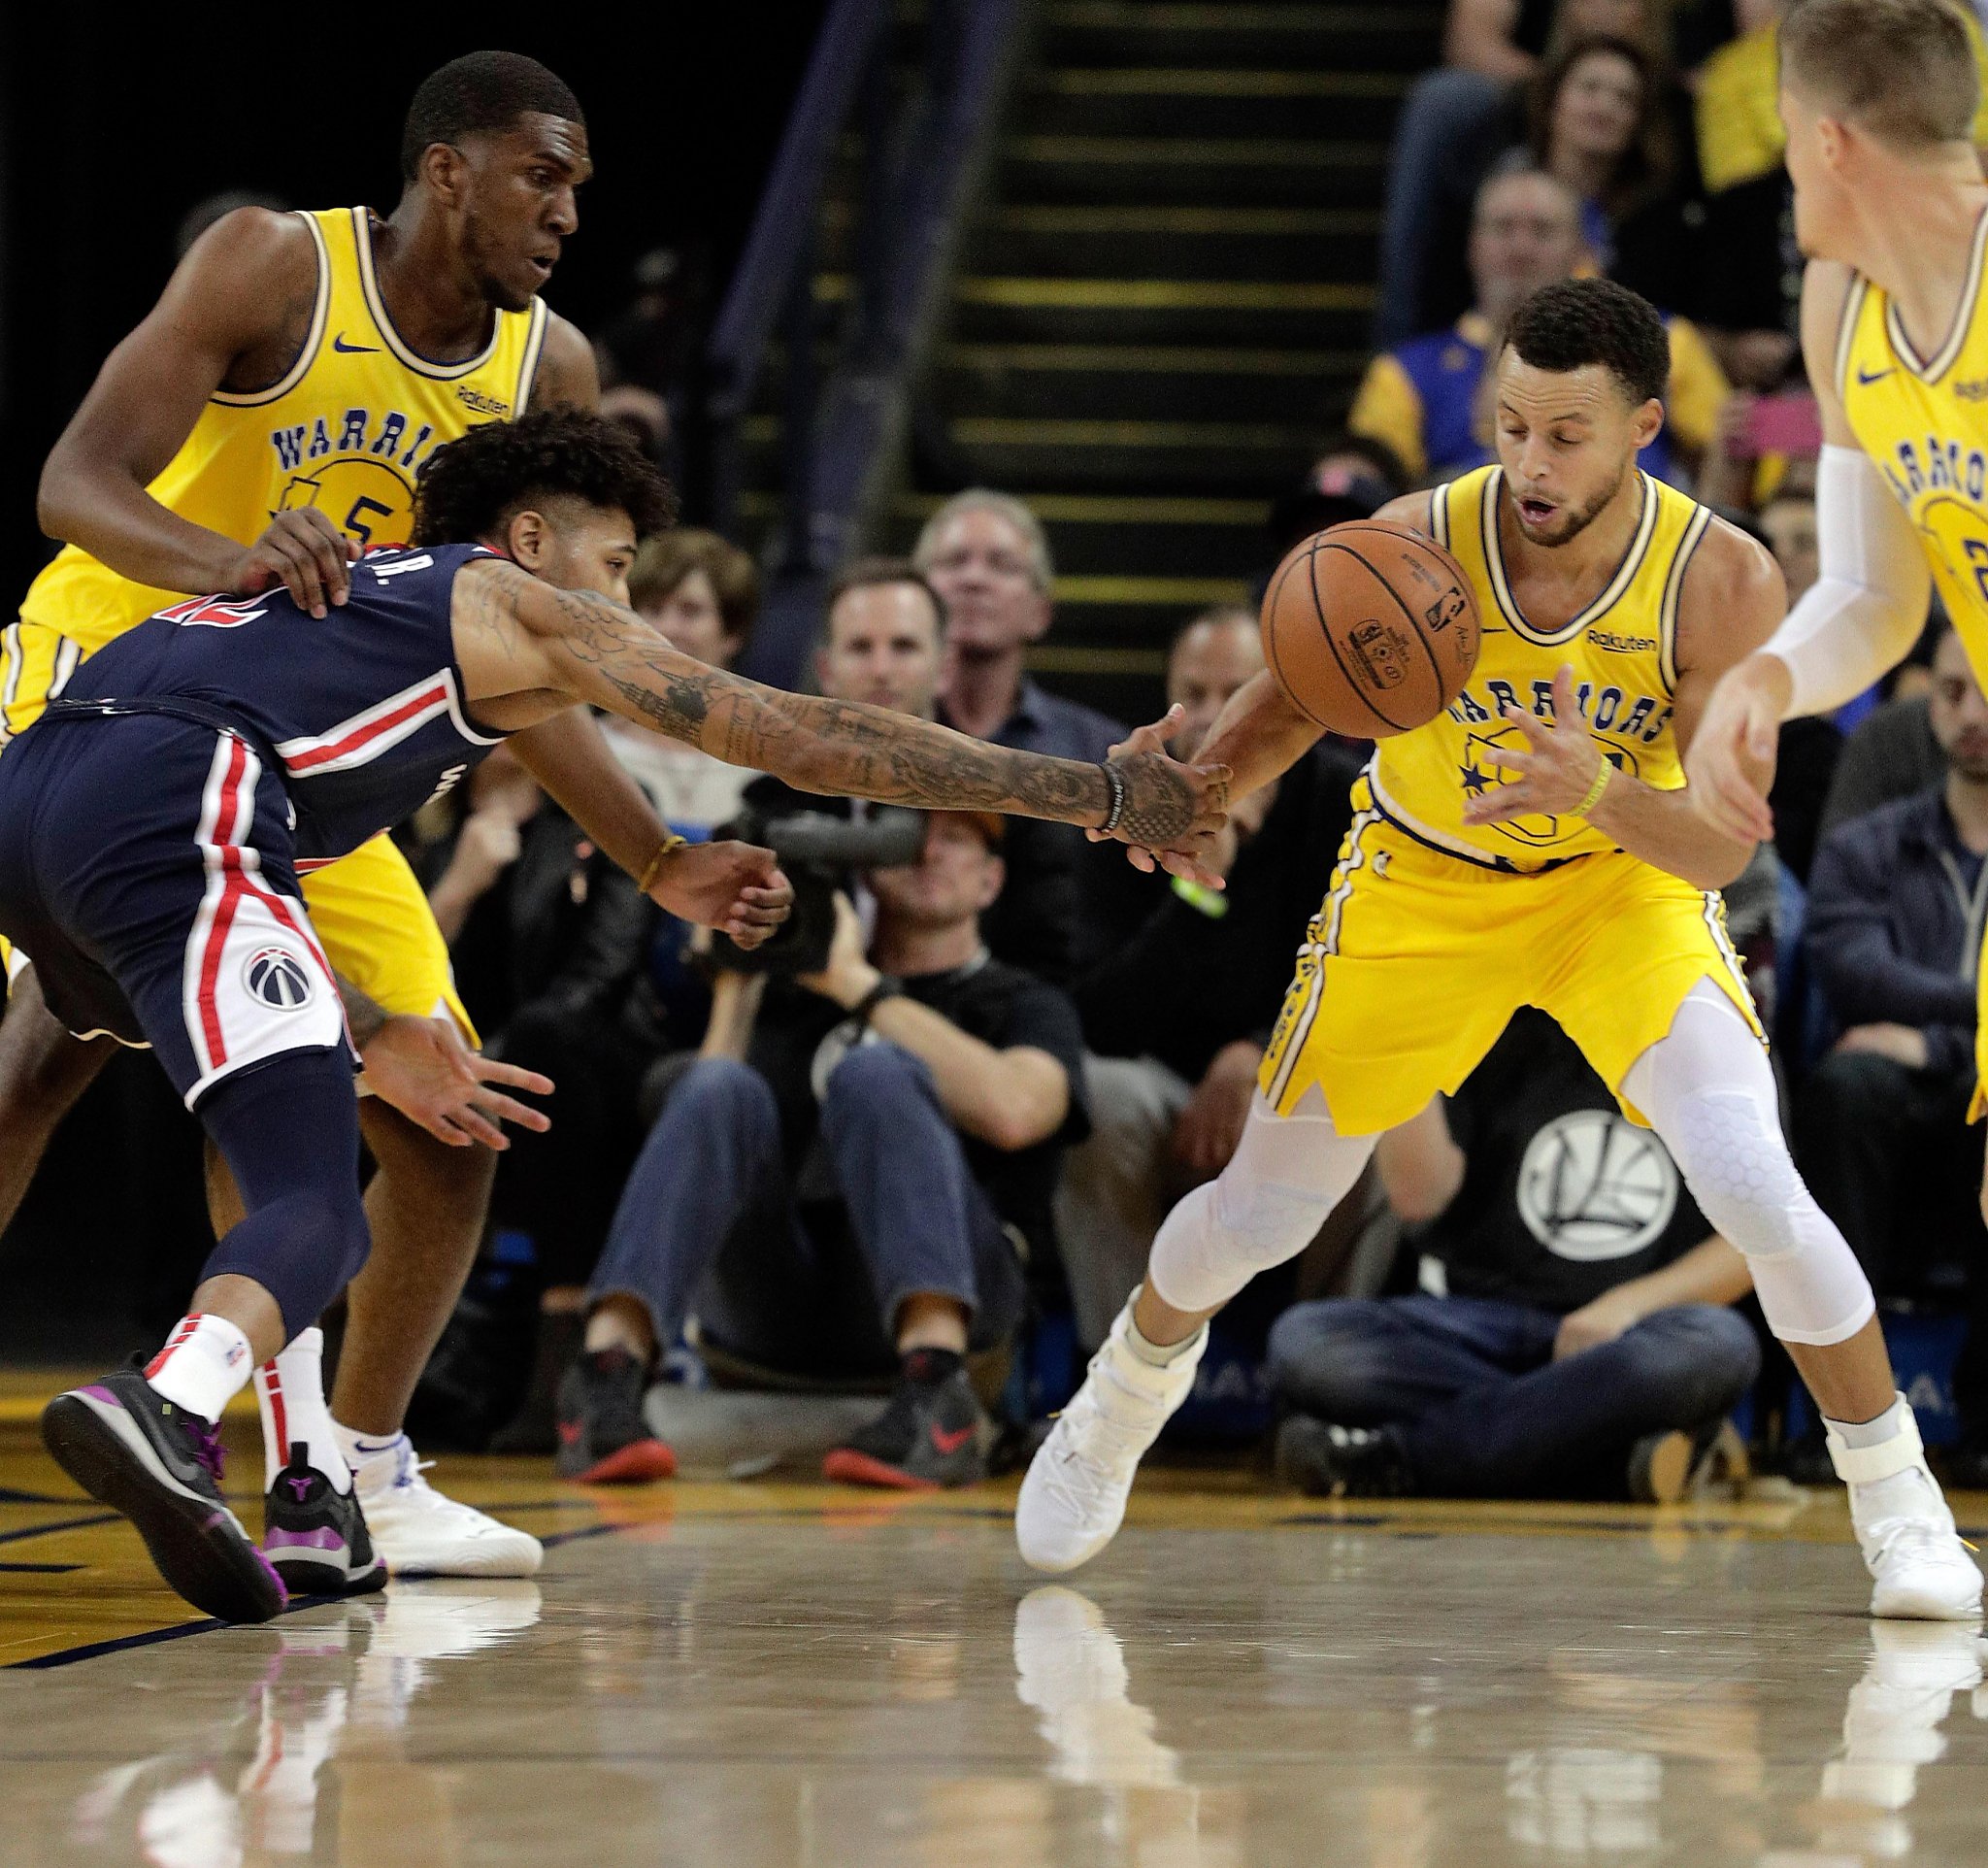 Stephen Curry’s 51-point outburst leaves Wizards exasperated - SFChronicle.com2048 x 1924